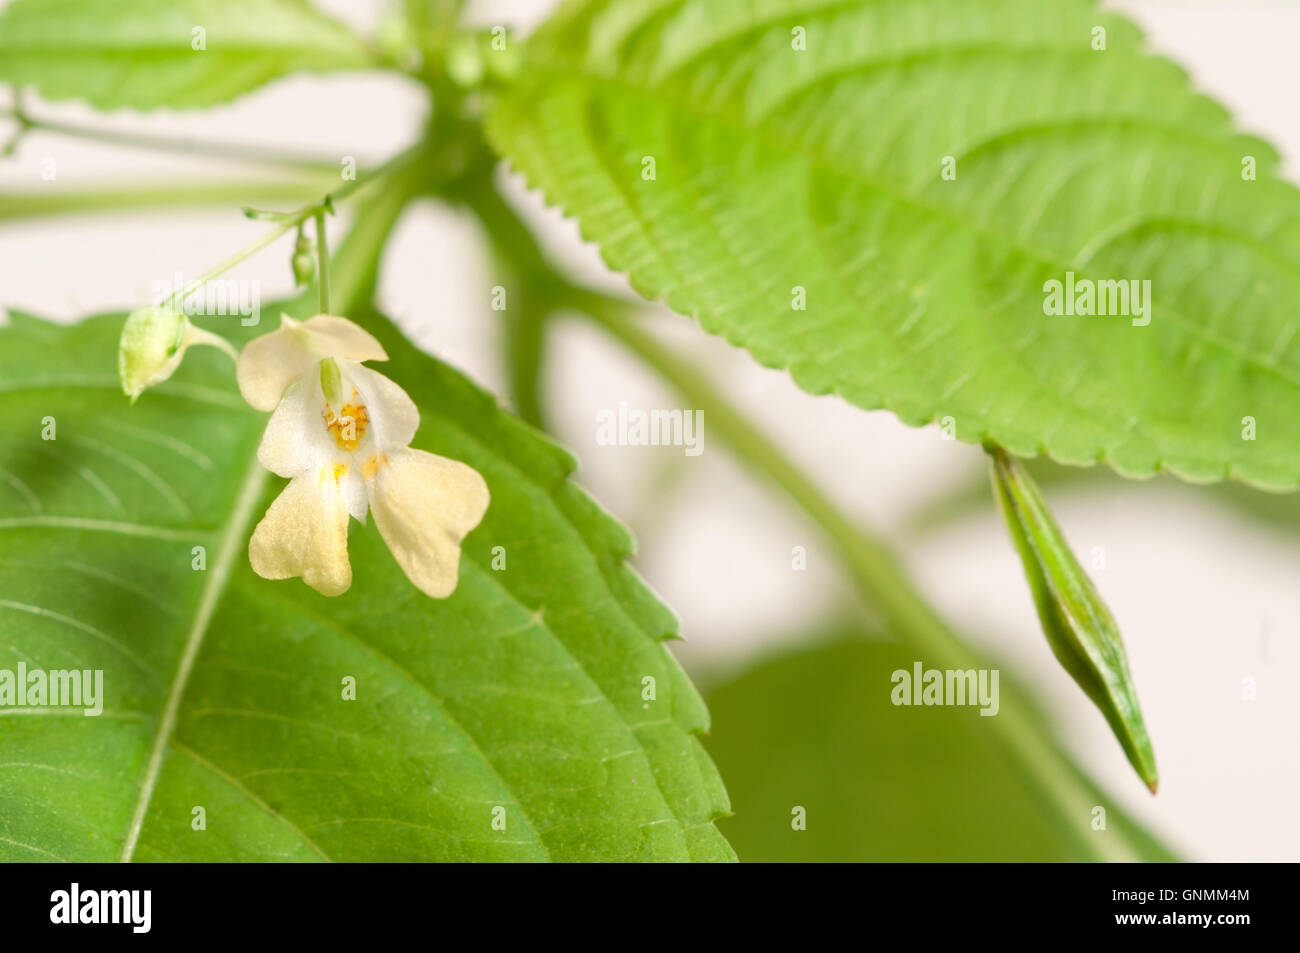 Impatiens parviflora on a white background, close up Stock Photo